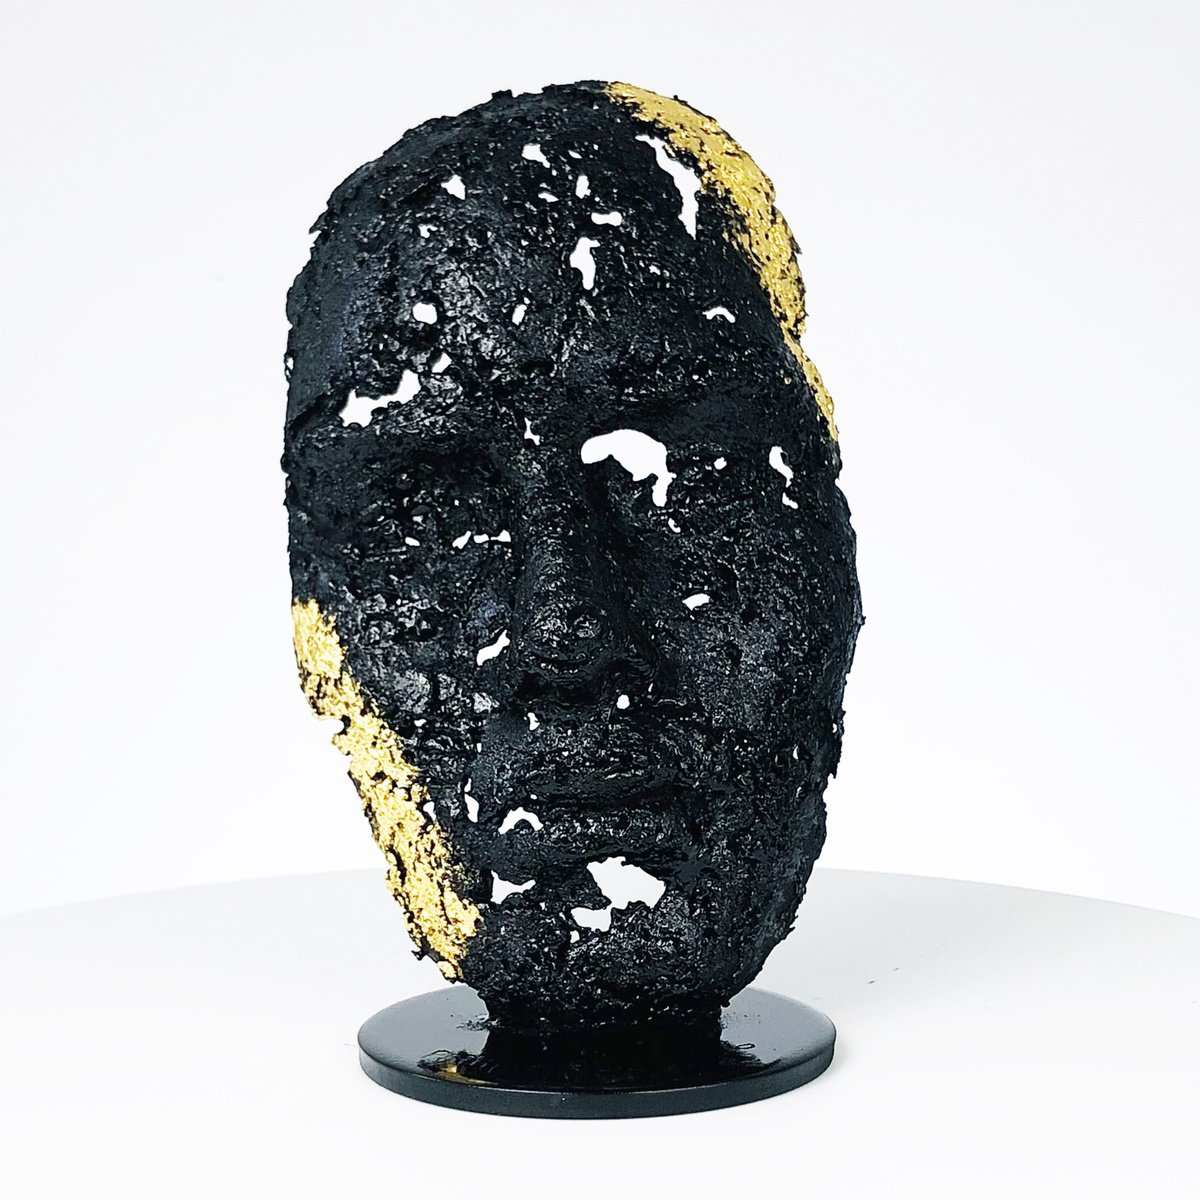 A tear 114-21 - Face sculpture in metal, lace, steel and gold by Philippe Buil